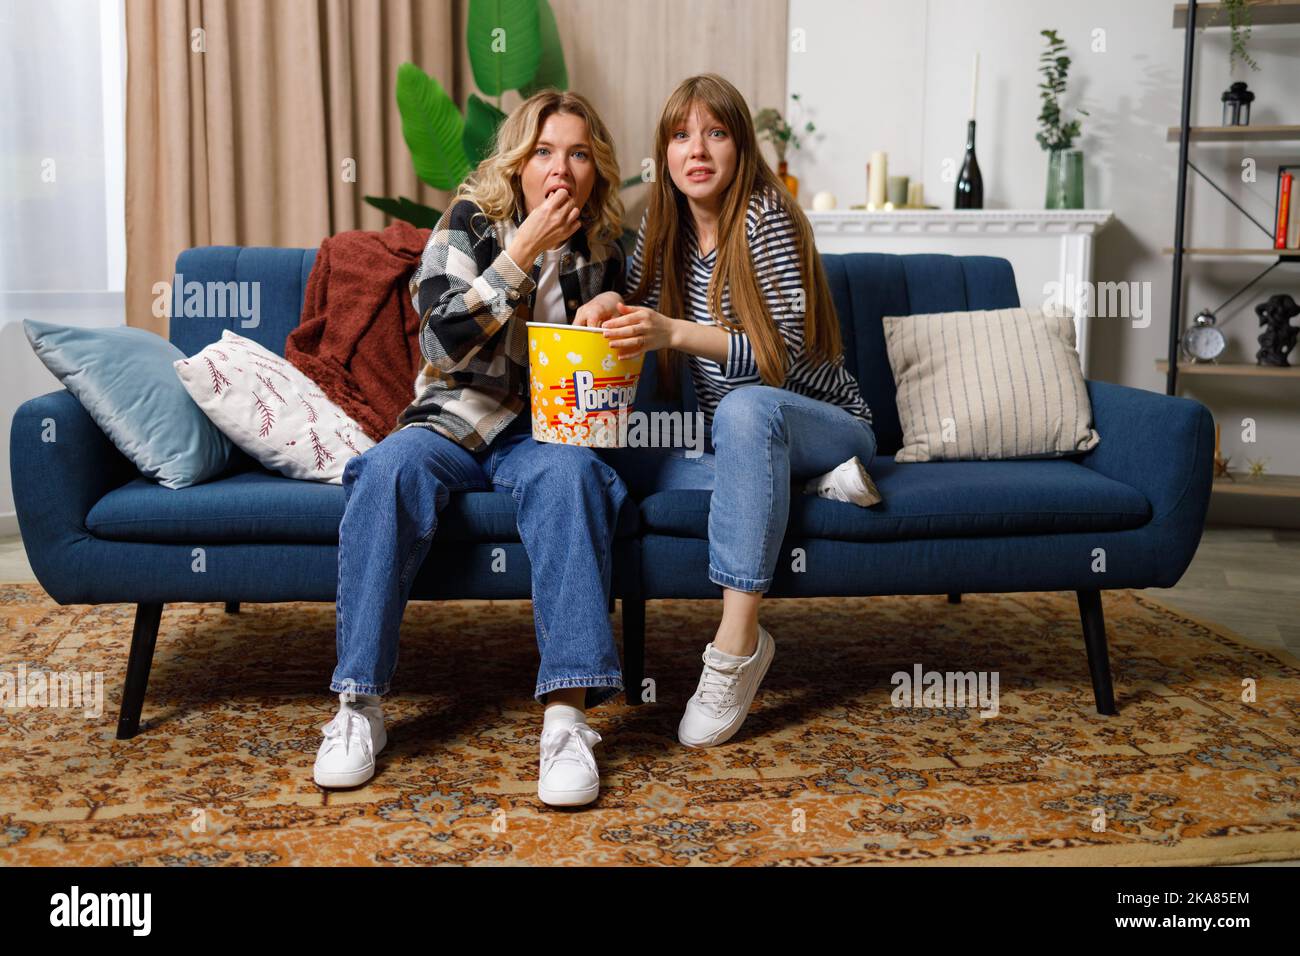 Women with surprised faces watching tv at home on the couch Stock Photo